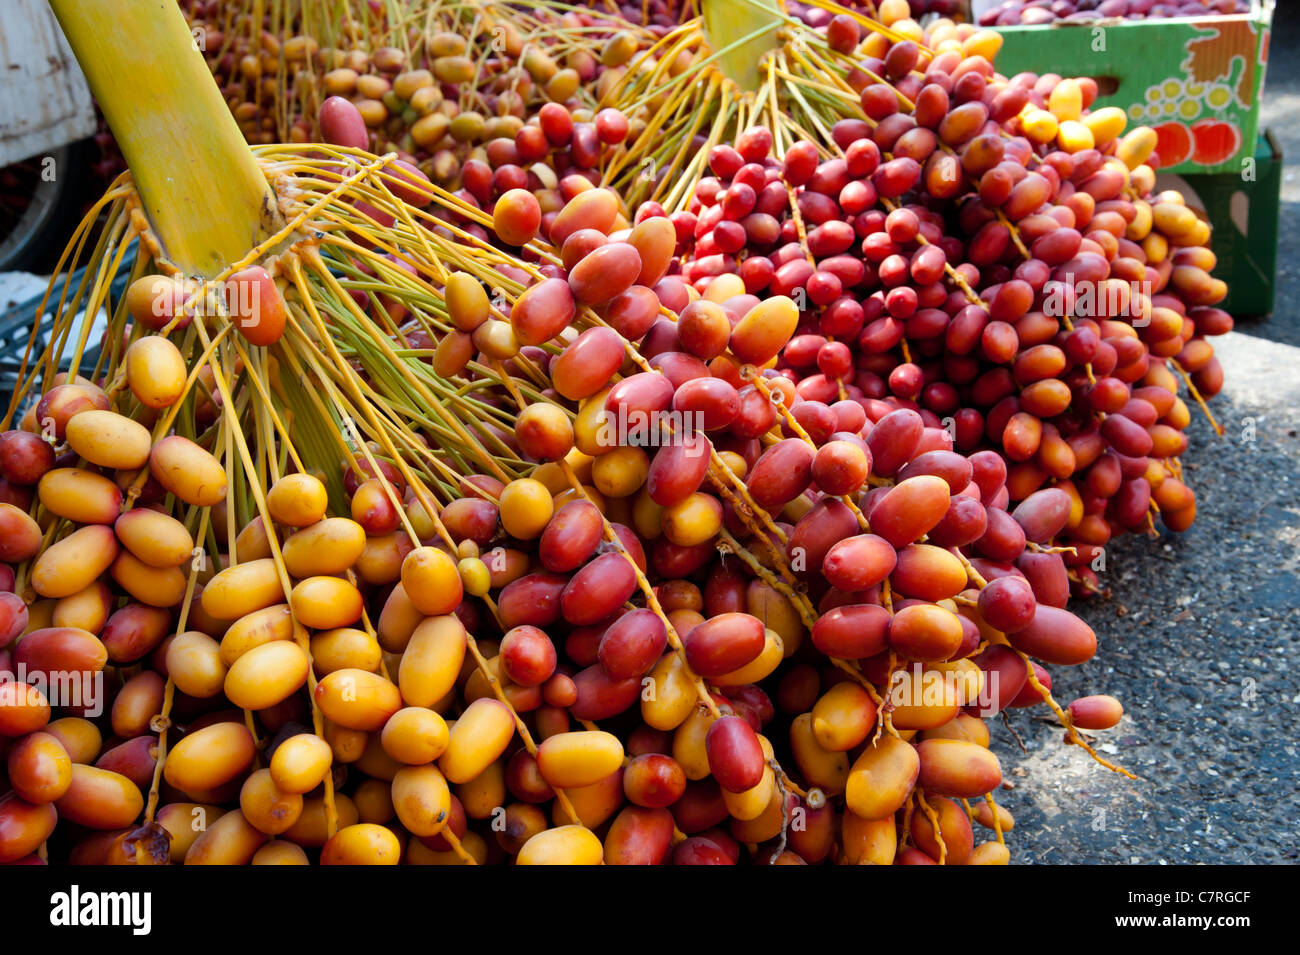 Fresh date fruits hang on stalks at a market in the West Bank Palestinian city of Jericho. Stock Photo